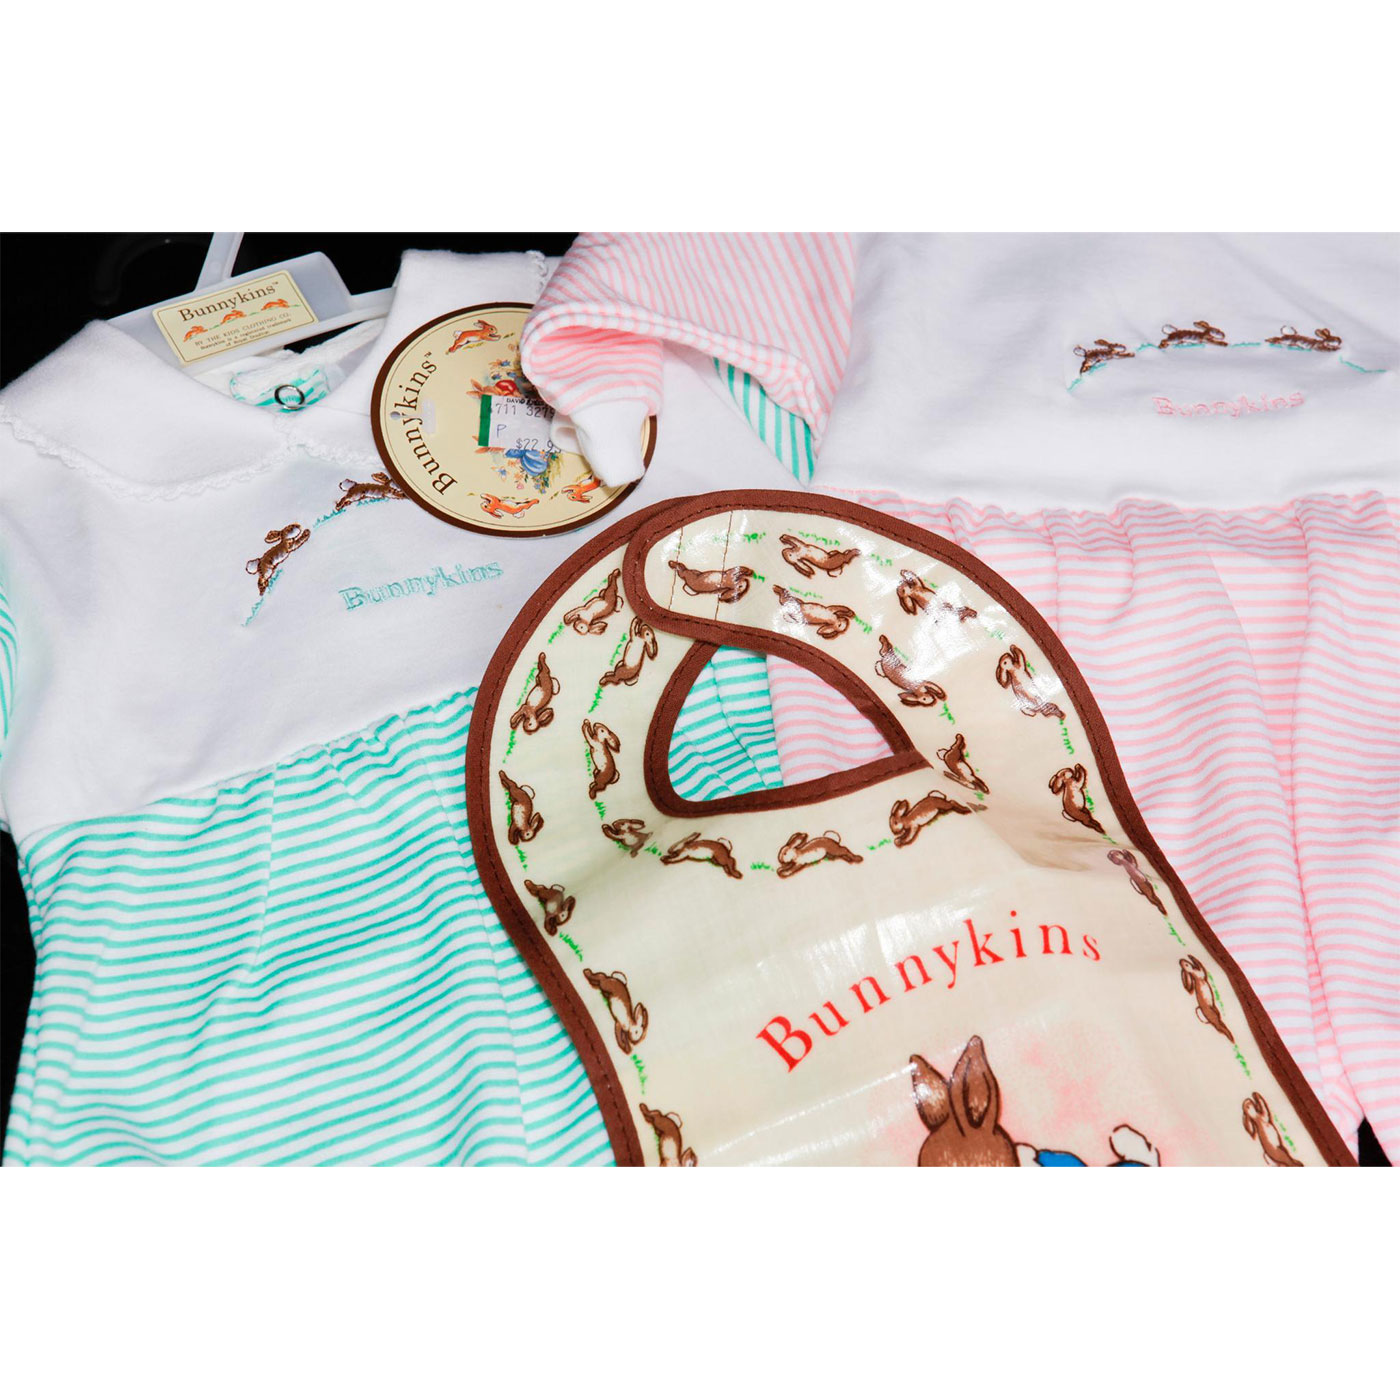 ROYAL DOULTON BUNNYKINS BABY CLOTHING AND ACCESSORIES - Image 7 of 8